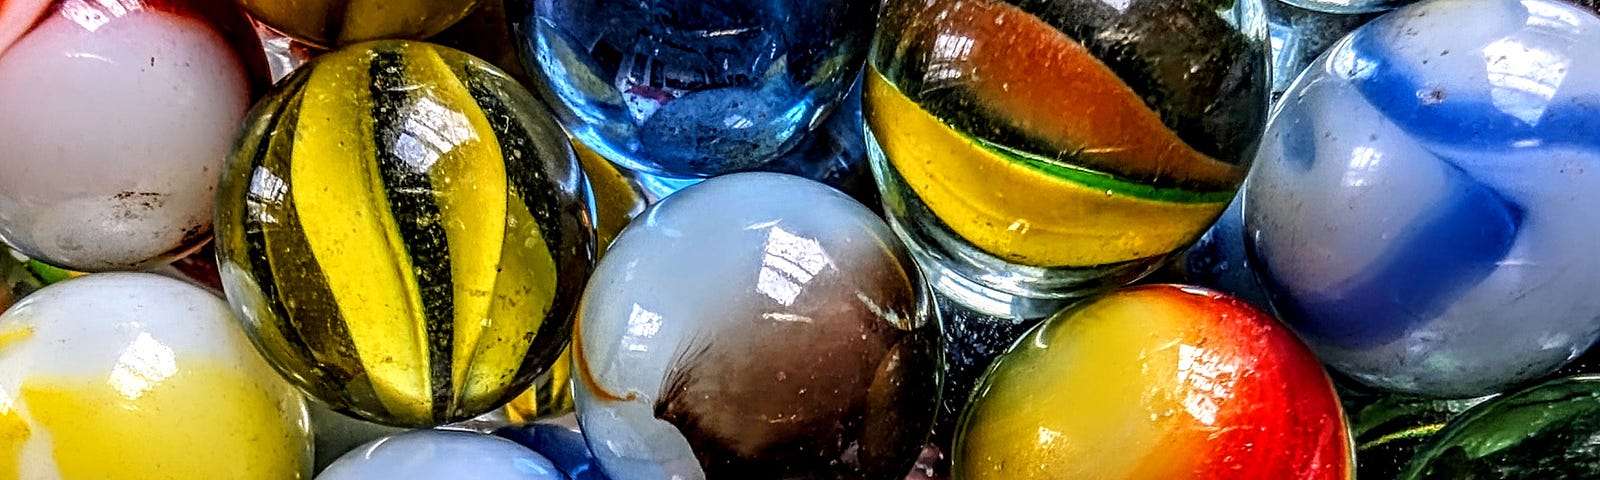 Closeup view of colorful glass marbles